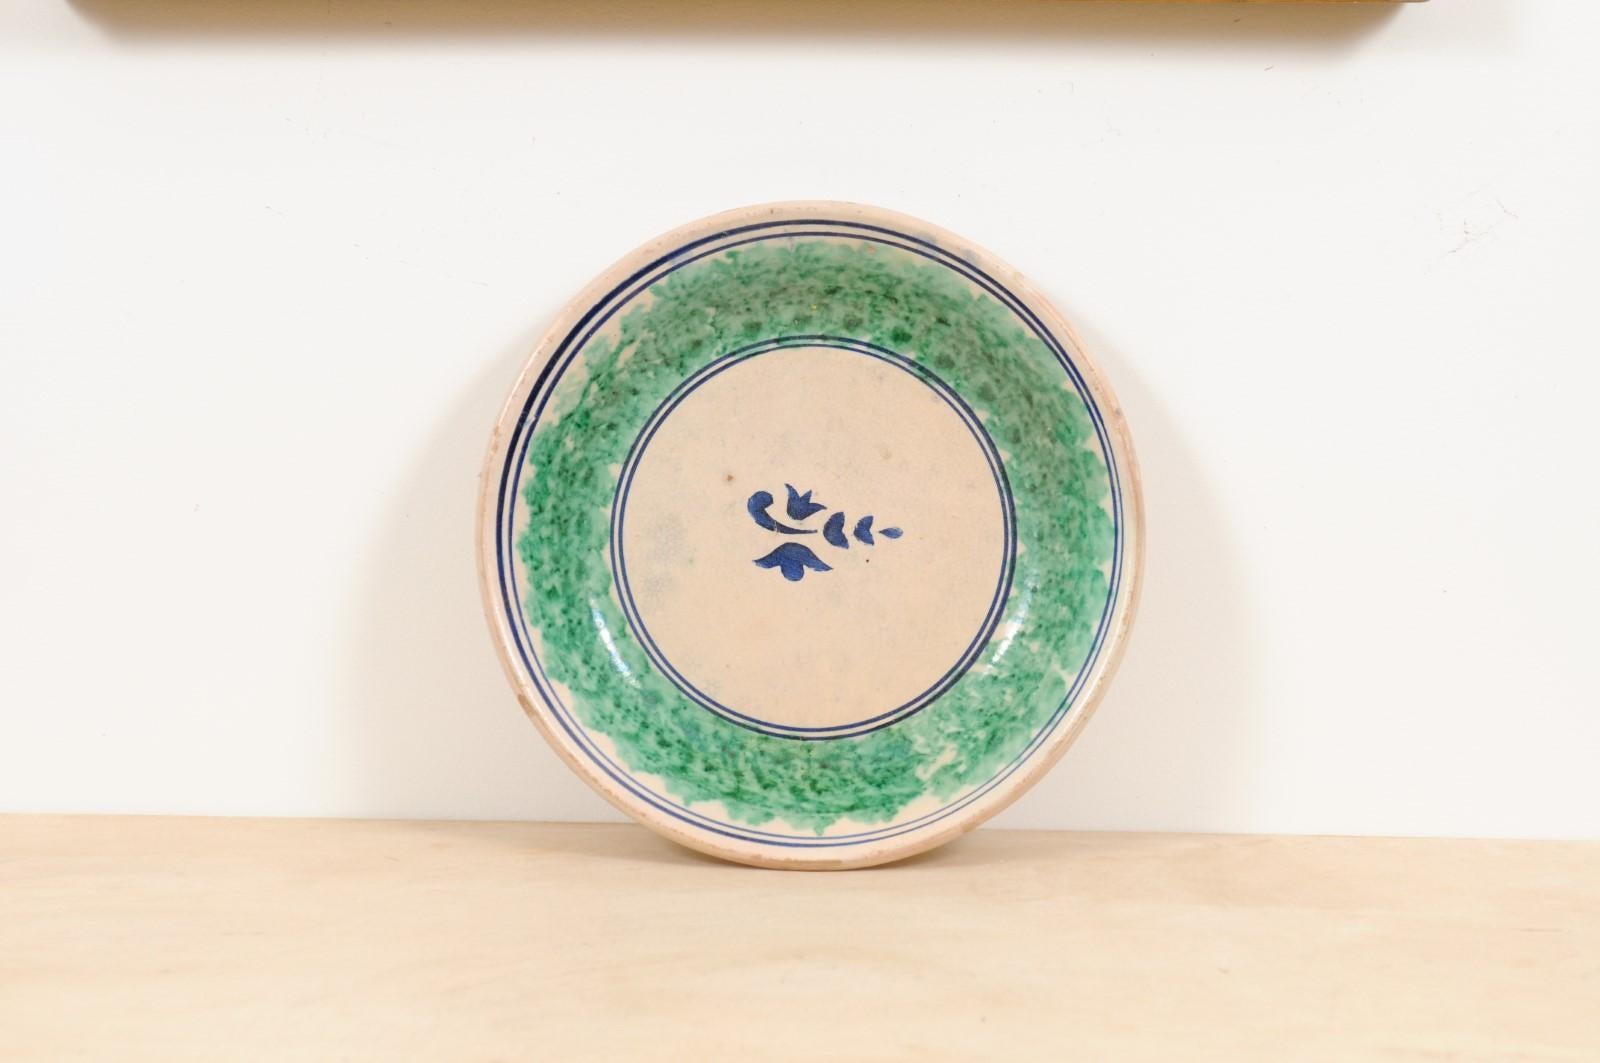 An Italian pottery platter from the 19th century, with stylized foliage motif, green and blue tones. Created in Northern Italy during the 19th century, this circular pottery platter features navy blue and green tones alternating on a neutral ground.